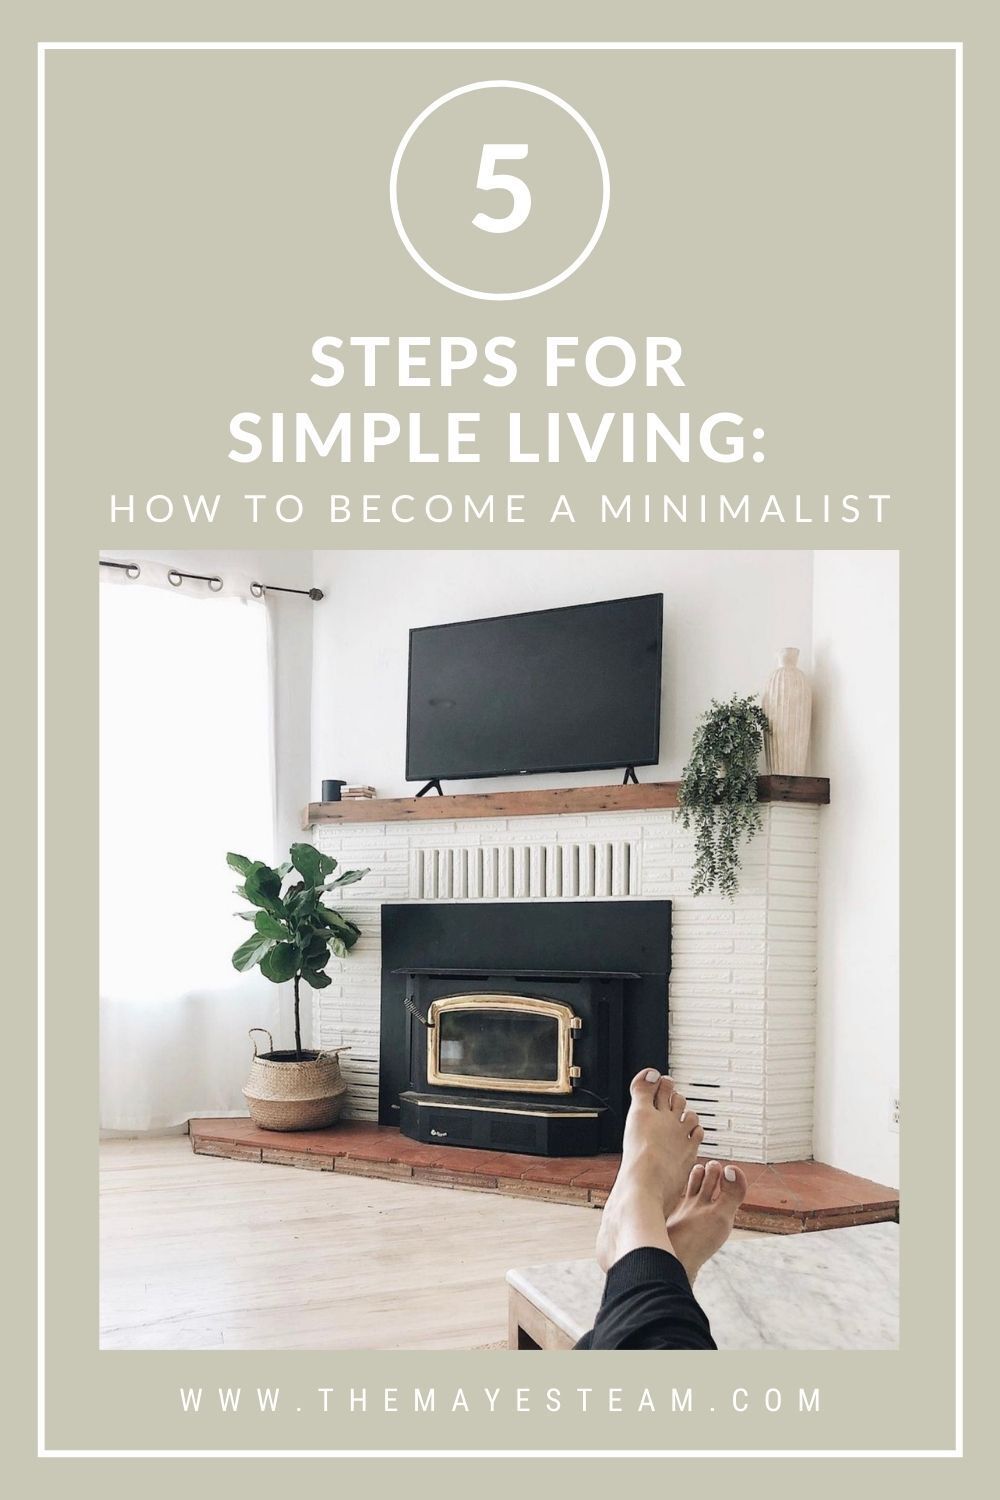 Debbie Mayes' feet rest in front of a modern fireplace with text overlaying the image that reads 5 Steps for Simple Living: How to Become a Minimalist